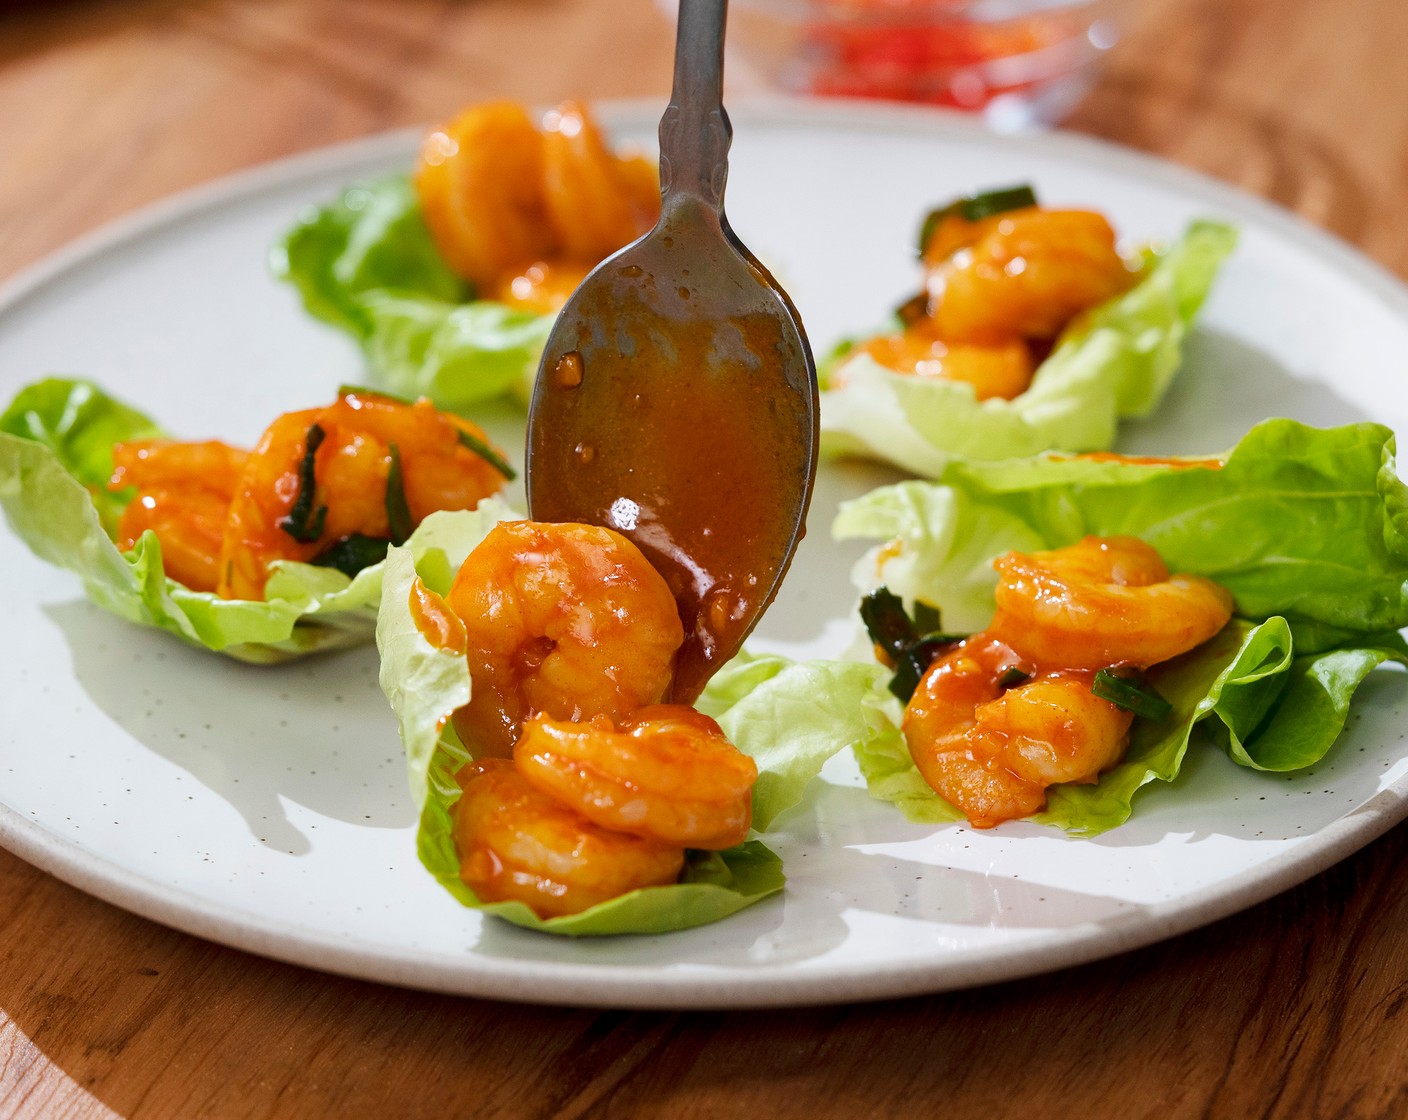 step 5 Top Butter Lettuce (8 pieces) with gochujang shrimp. Garnish with Scallions (to taste), Red Chili Peppers (to taste), and White Sesame Seeds (to taste). Serve with Lemon (1).